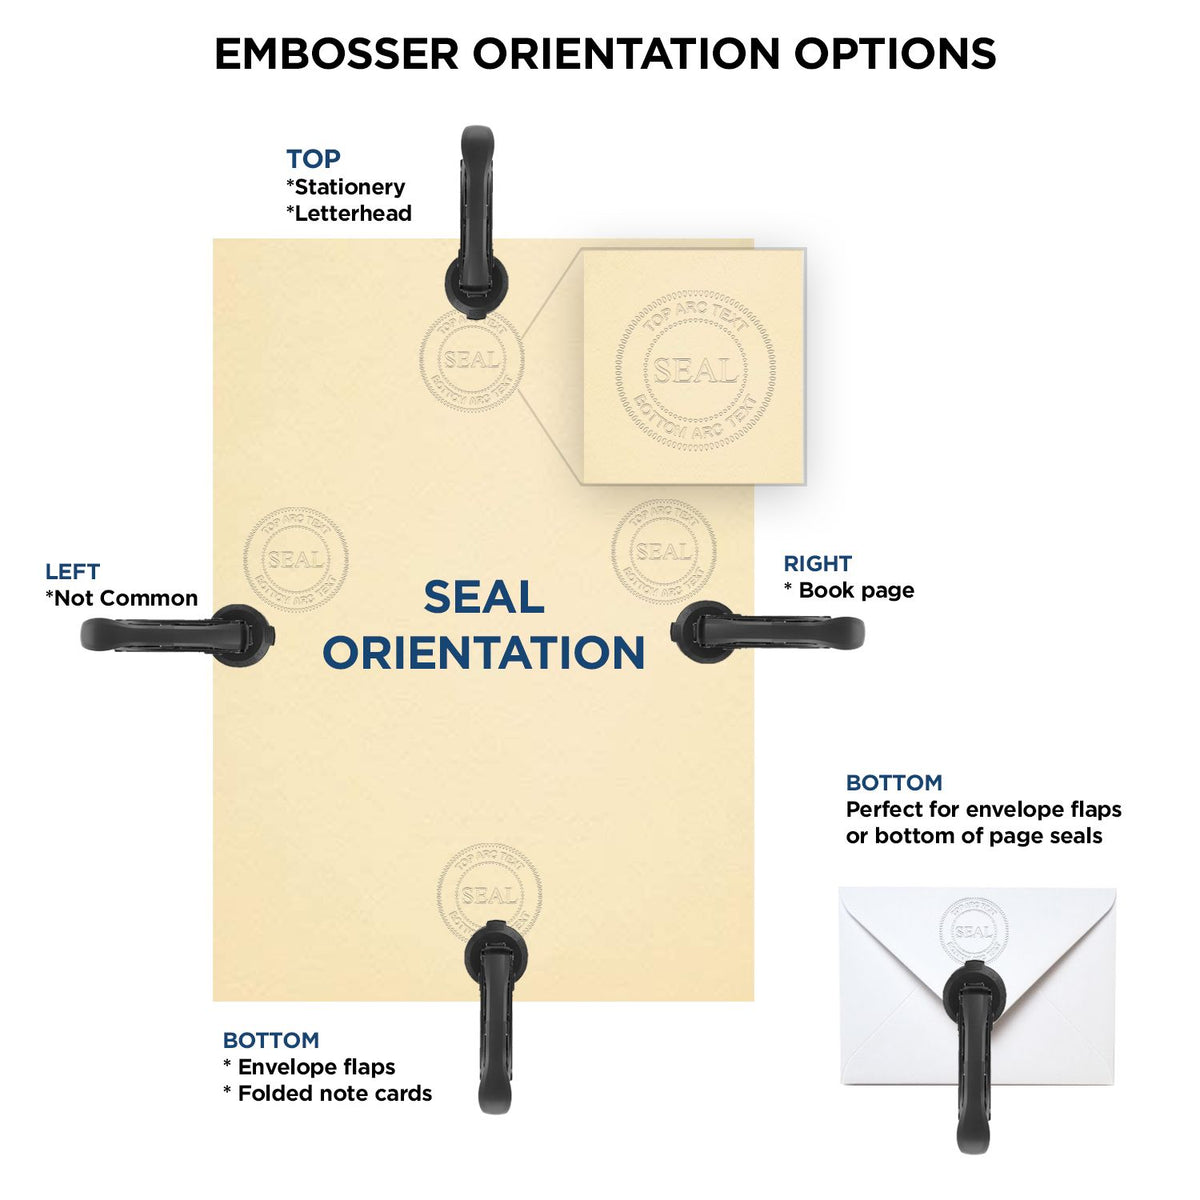 An infographic for the Long Reach New York Geology Seal showing embosser orientation, this is showing examples of a top, bottom, right and left insert.